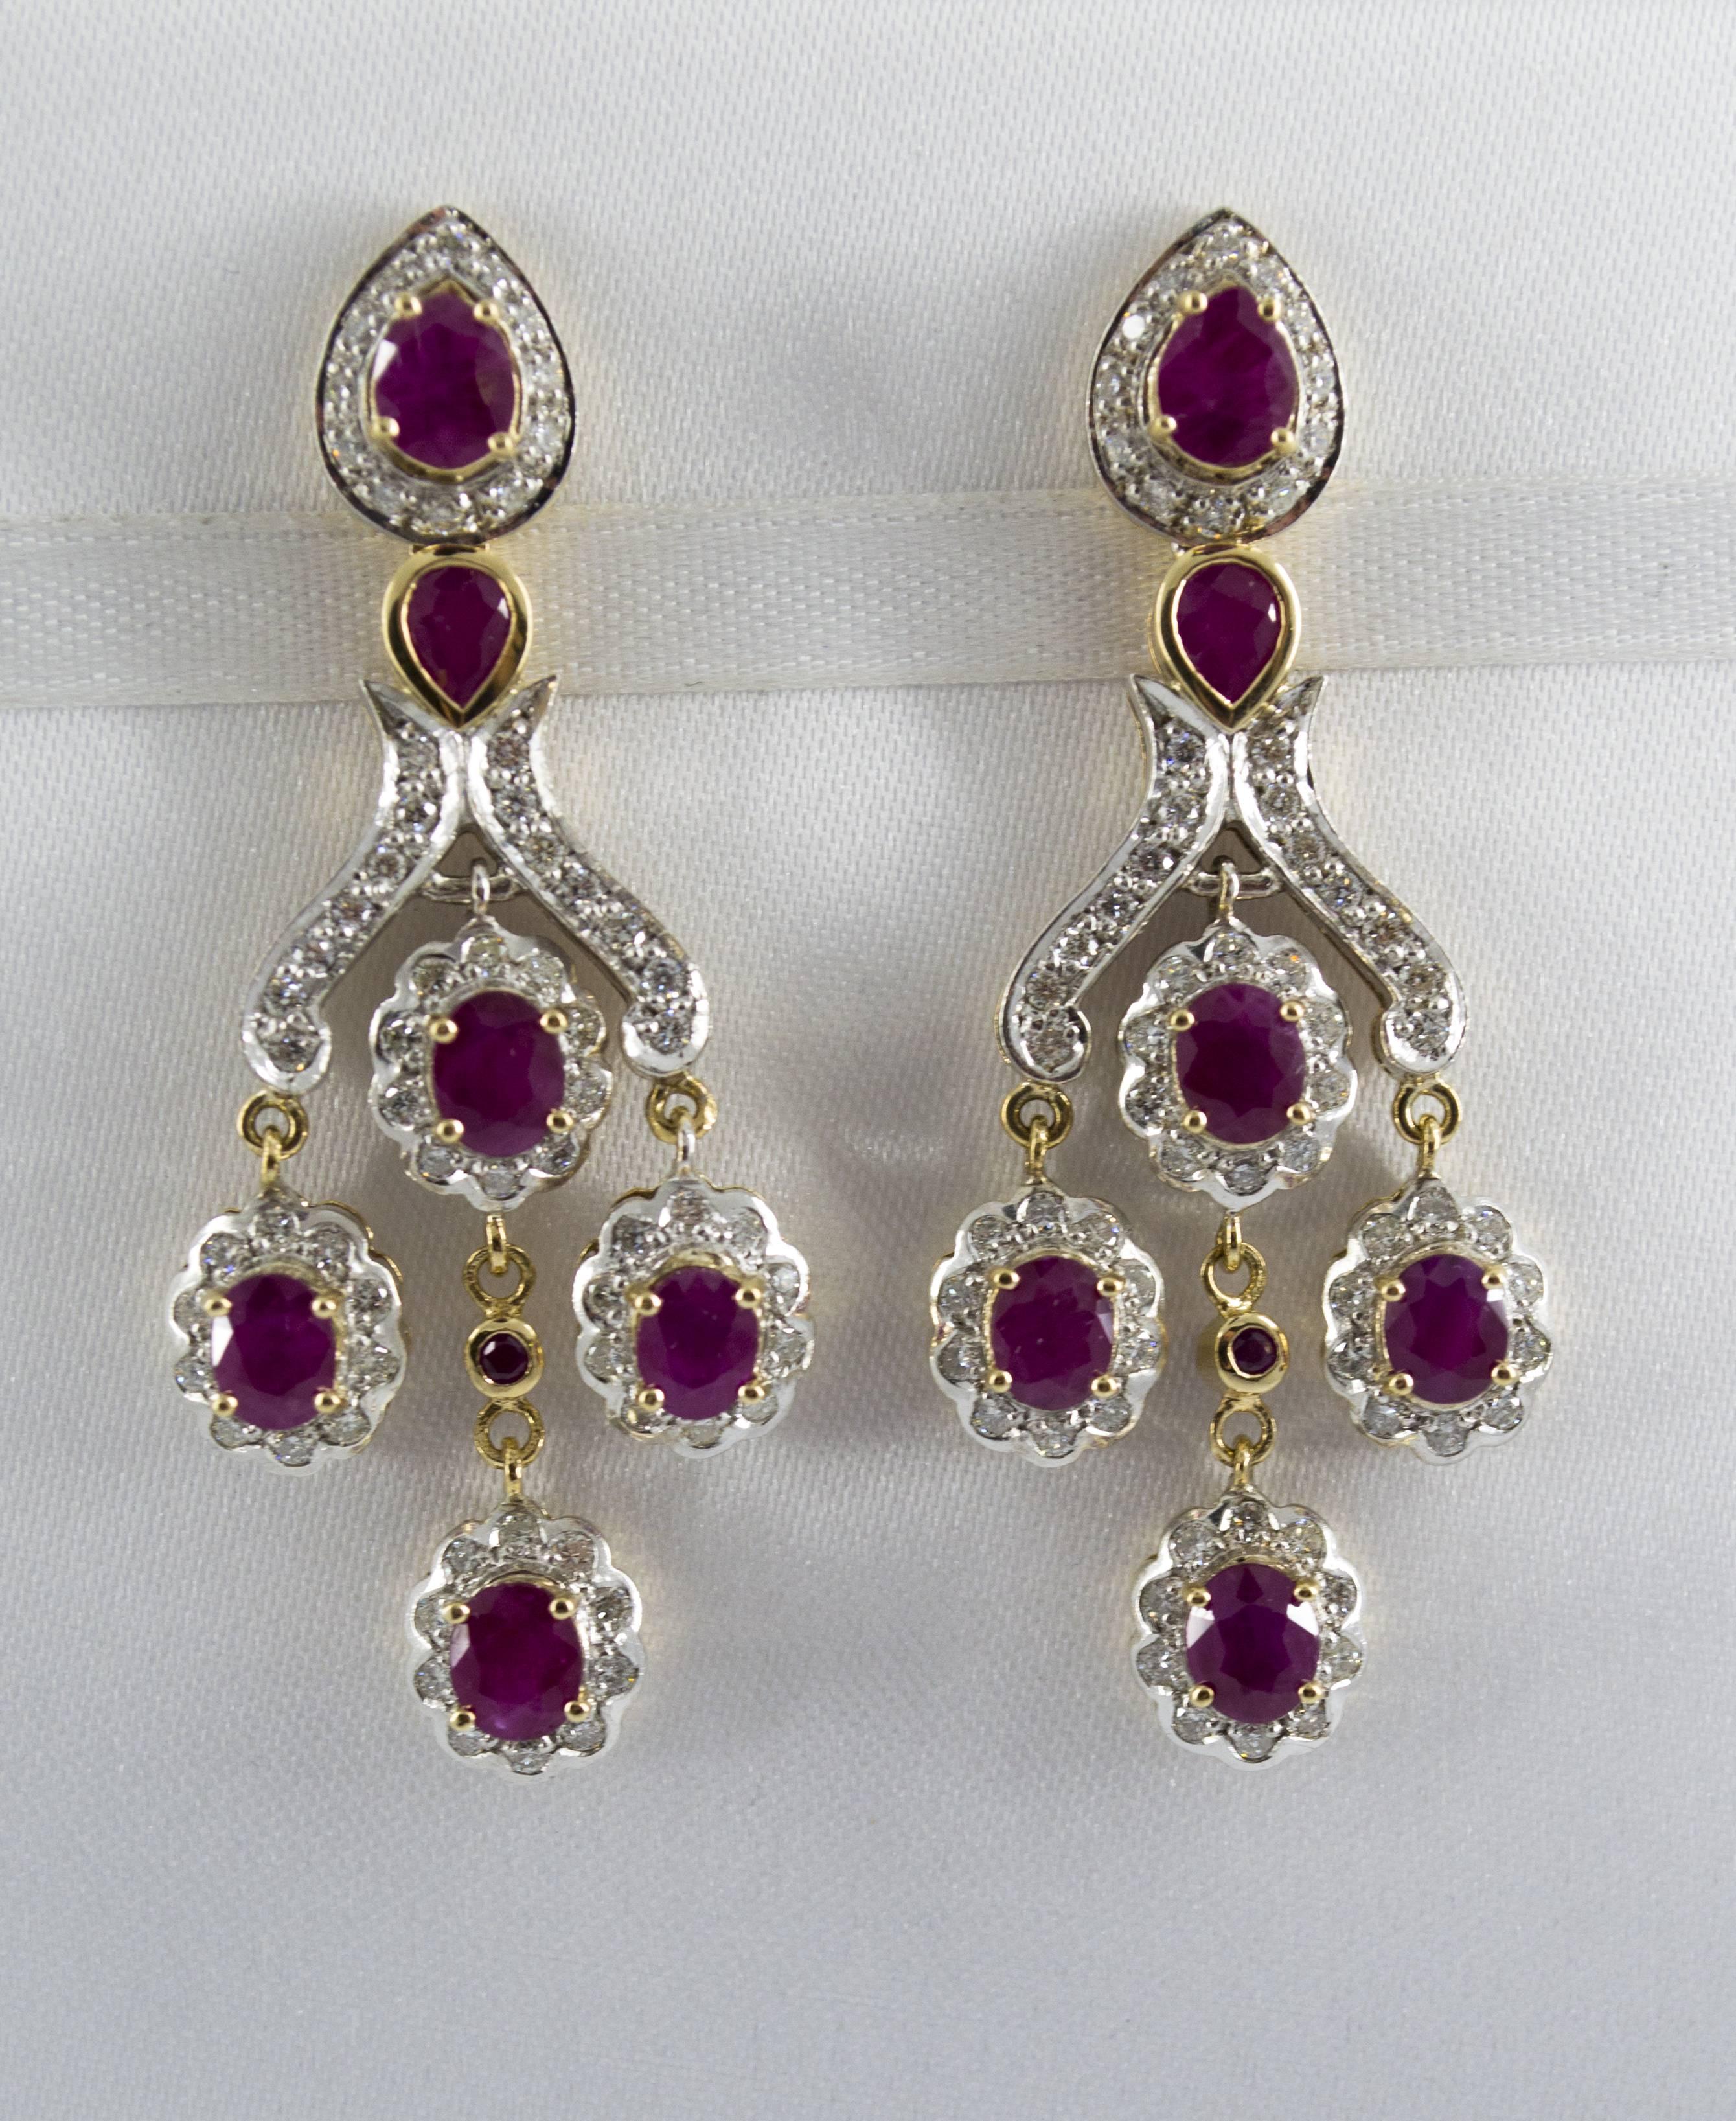 These Earrings are made of 9K Yellow Gold and Sterling Silver.
These Earrings have 1.30 Carats of Diamonds.
These Earrings have 10.00 Carats of Ruby.
We're a workshop so every piece is handmade, customizable and resizable.